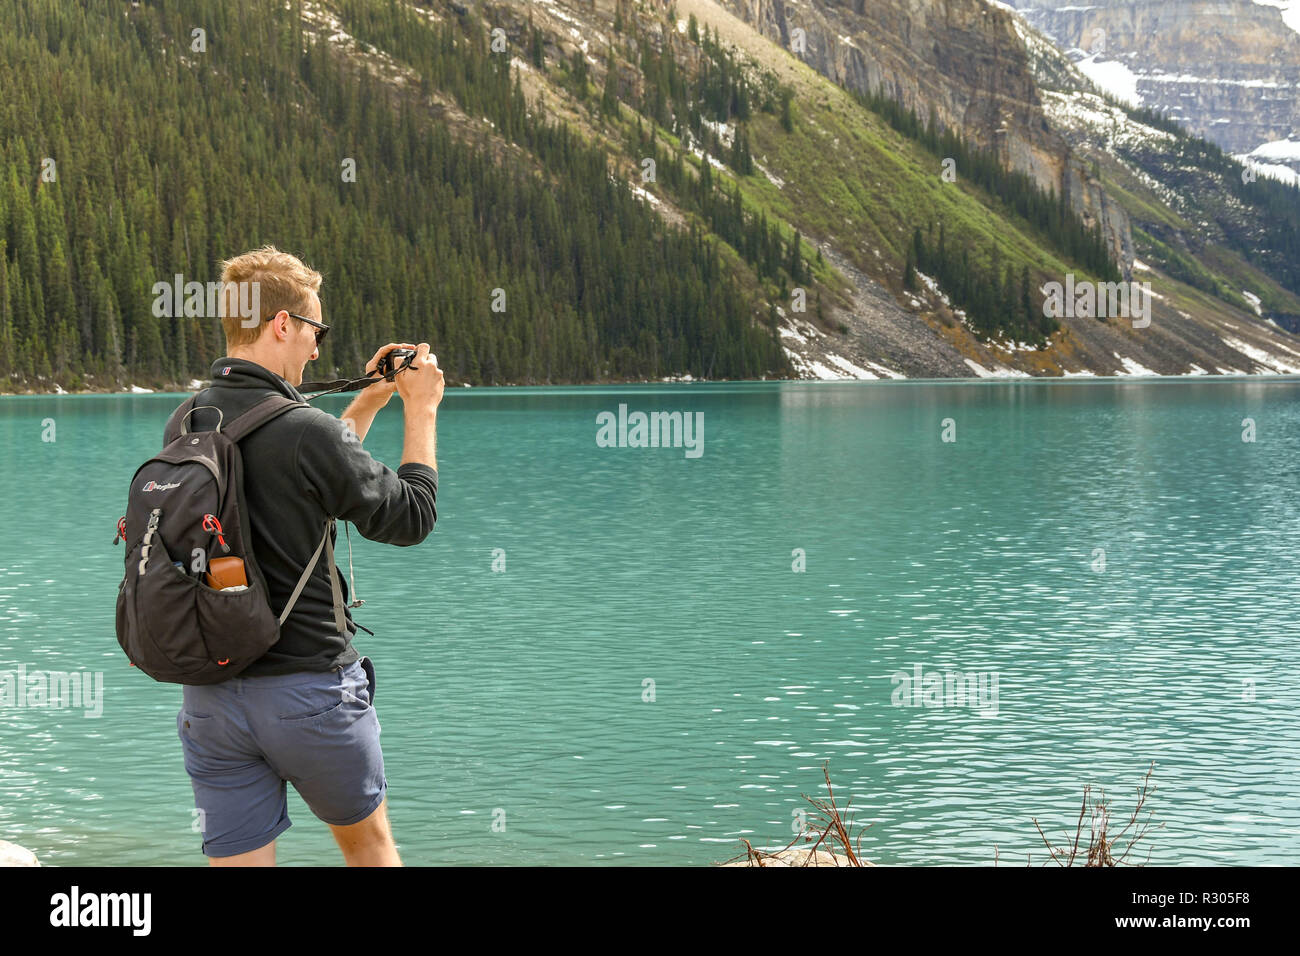 LAKE LOUISE, AB, CANADA - JUNE 2018: Person taking a picture on a camera while visiting Lake Louise in Alberta, Canada. Stock Photo